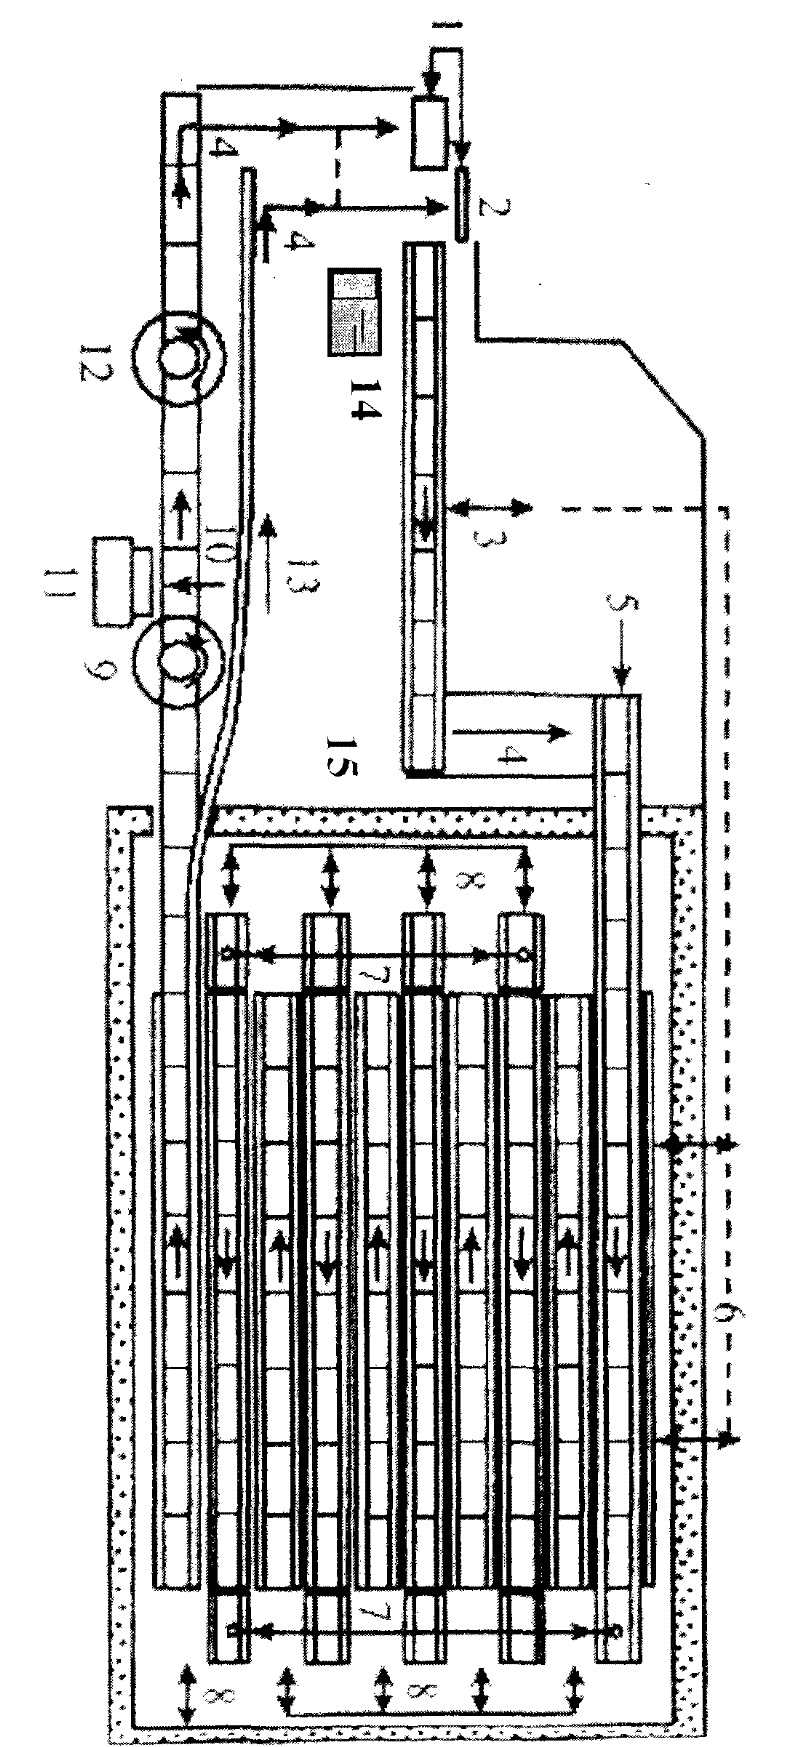 Continuous production device of hydroponics pasture